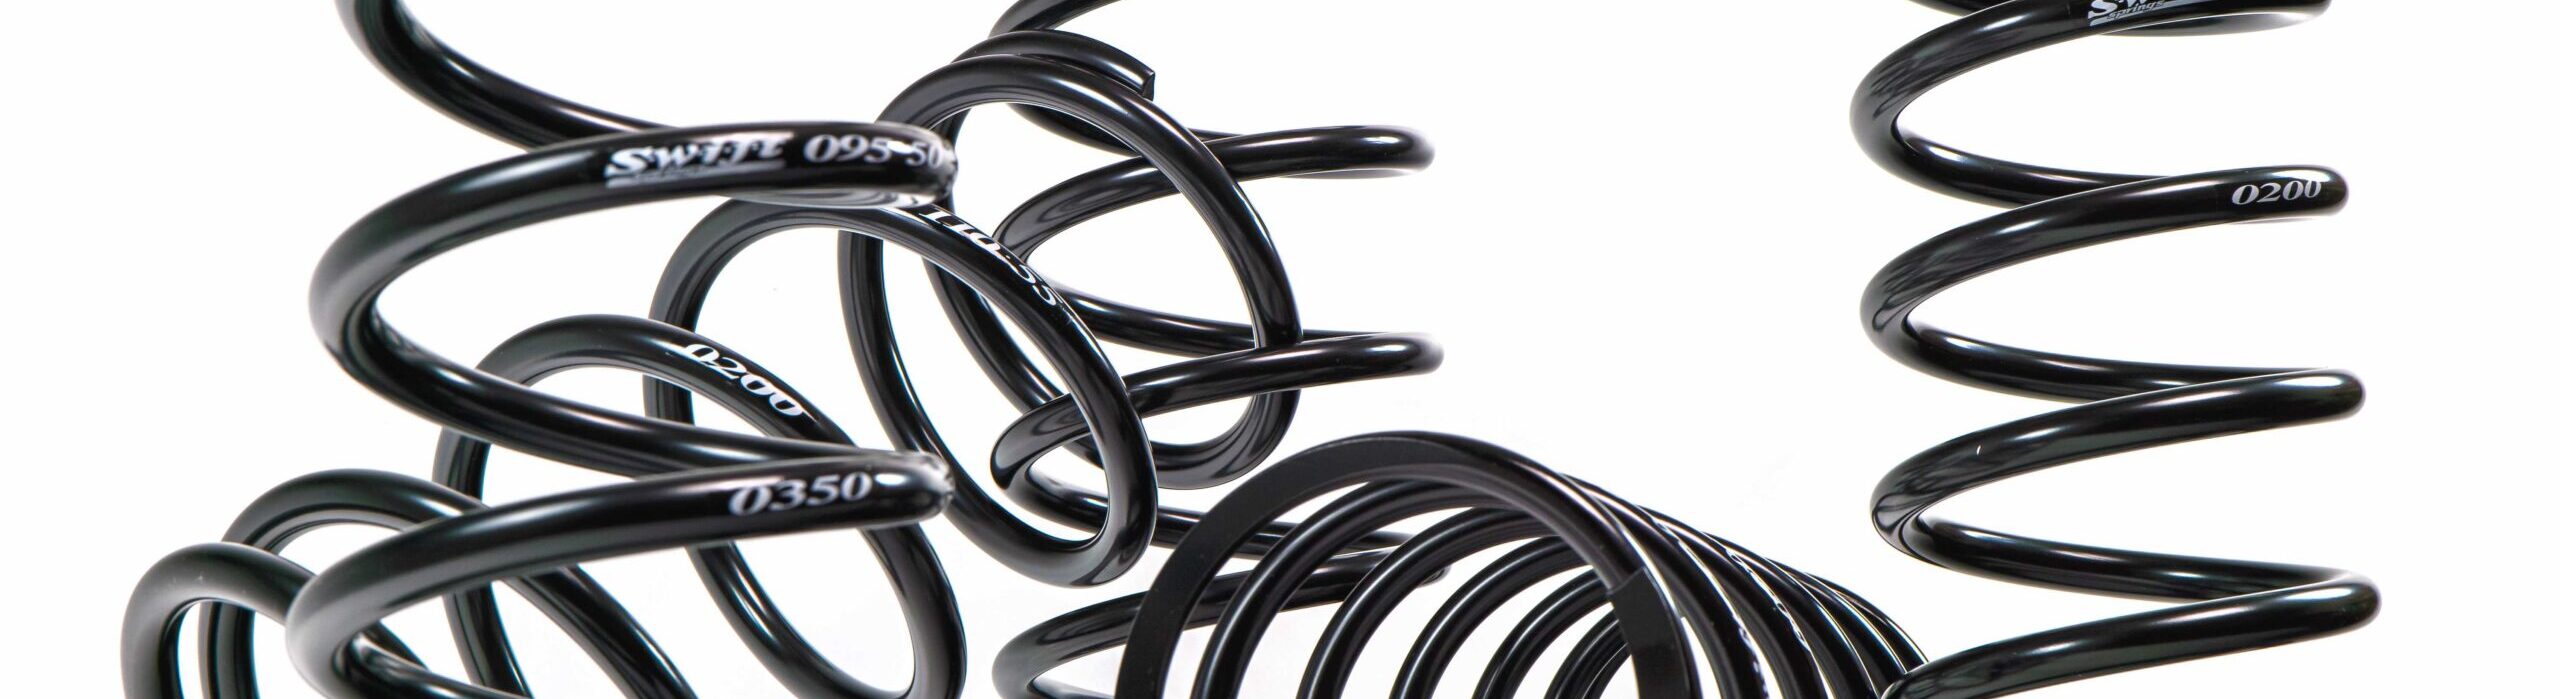 Standard Conventional Springs